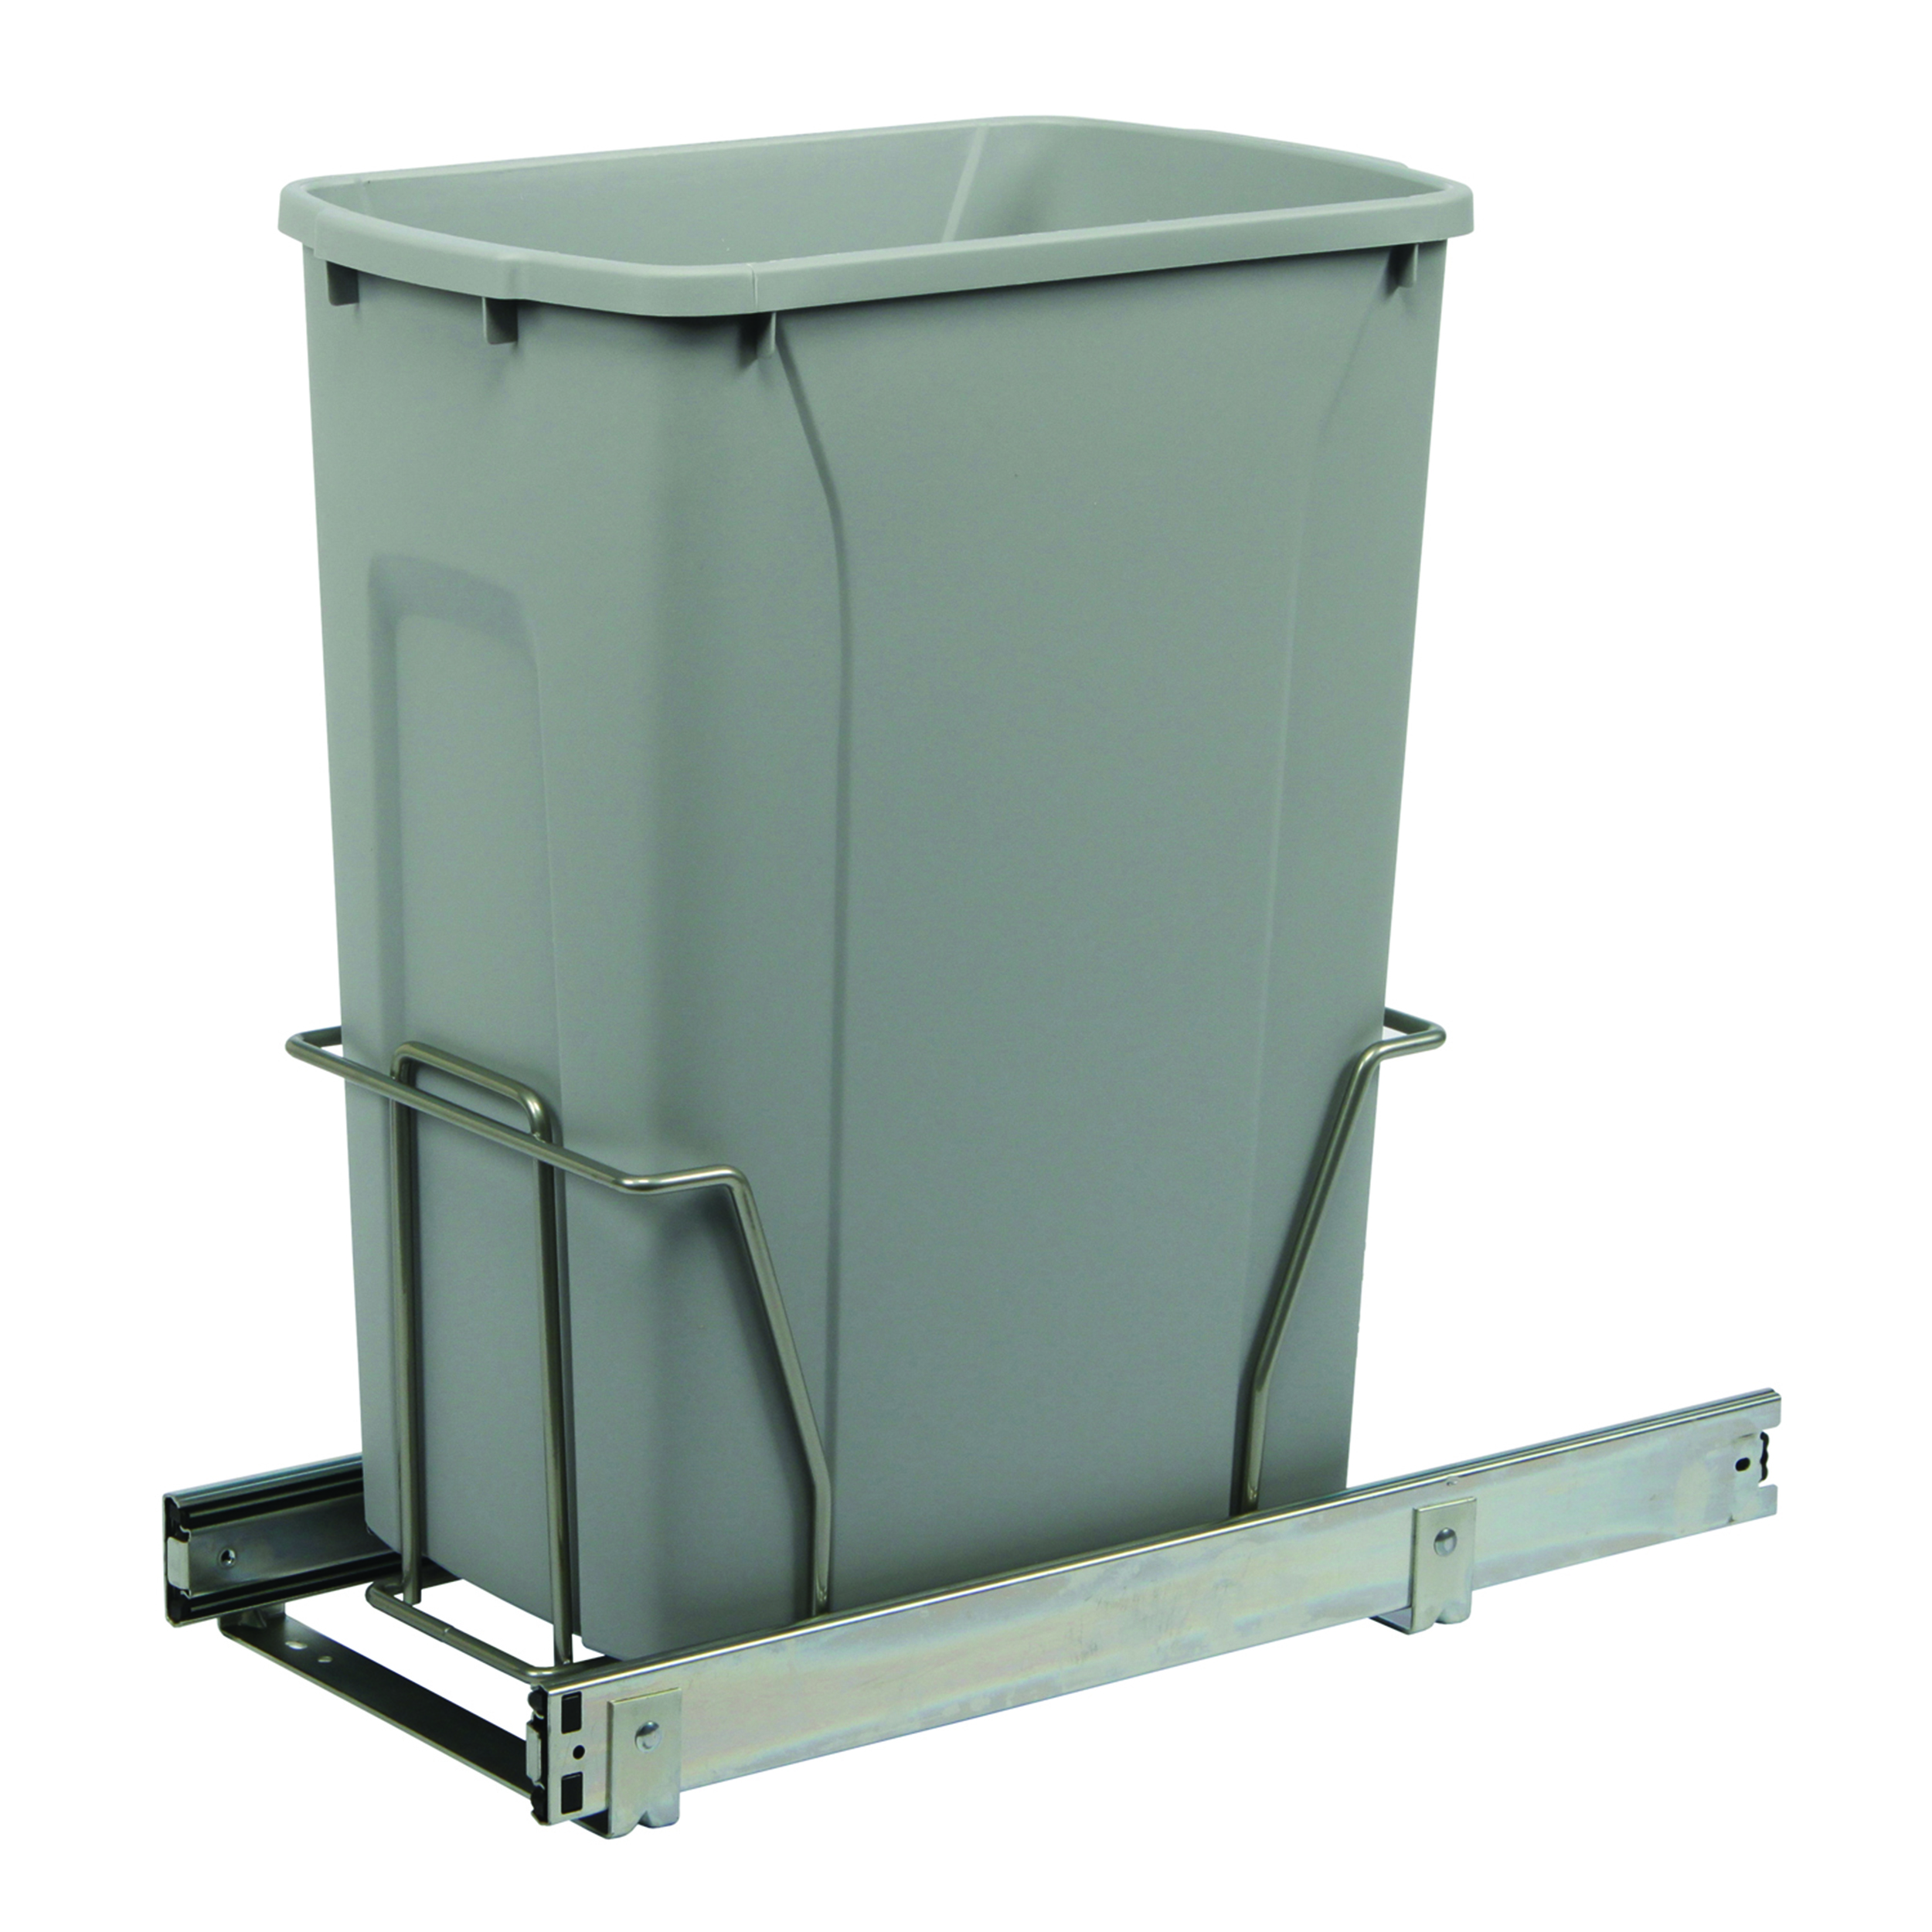 Real Solutions Single 35qt Pull-out Waste & Recyling Unit, Platinum